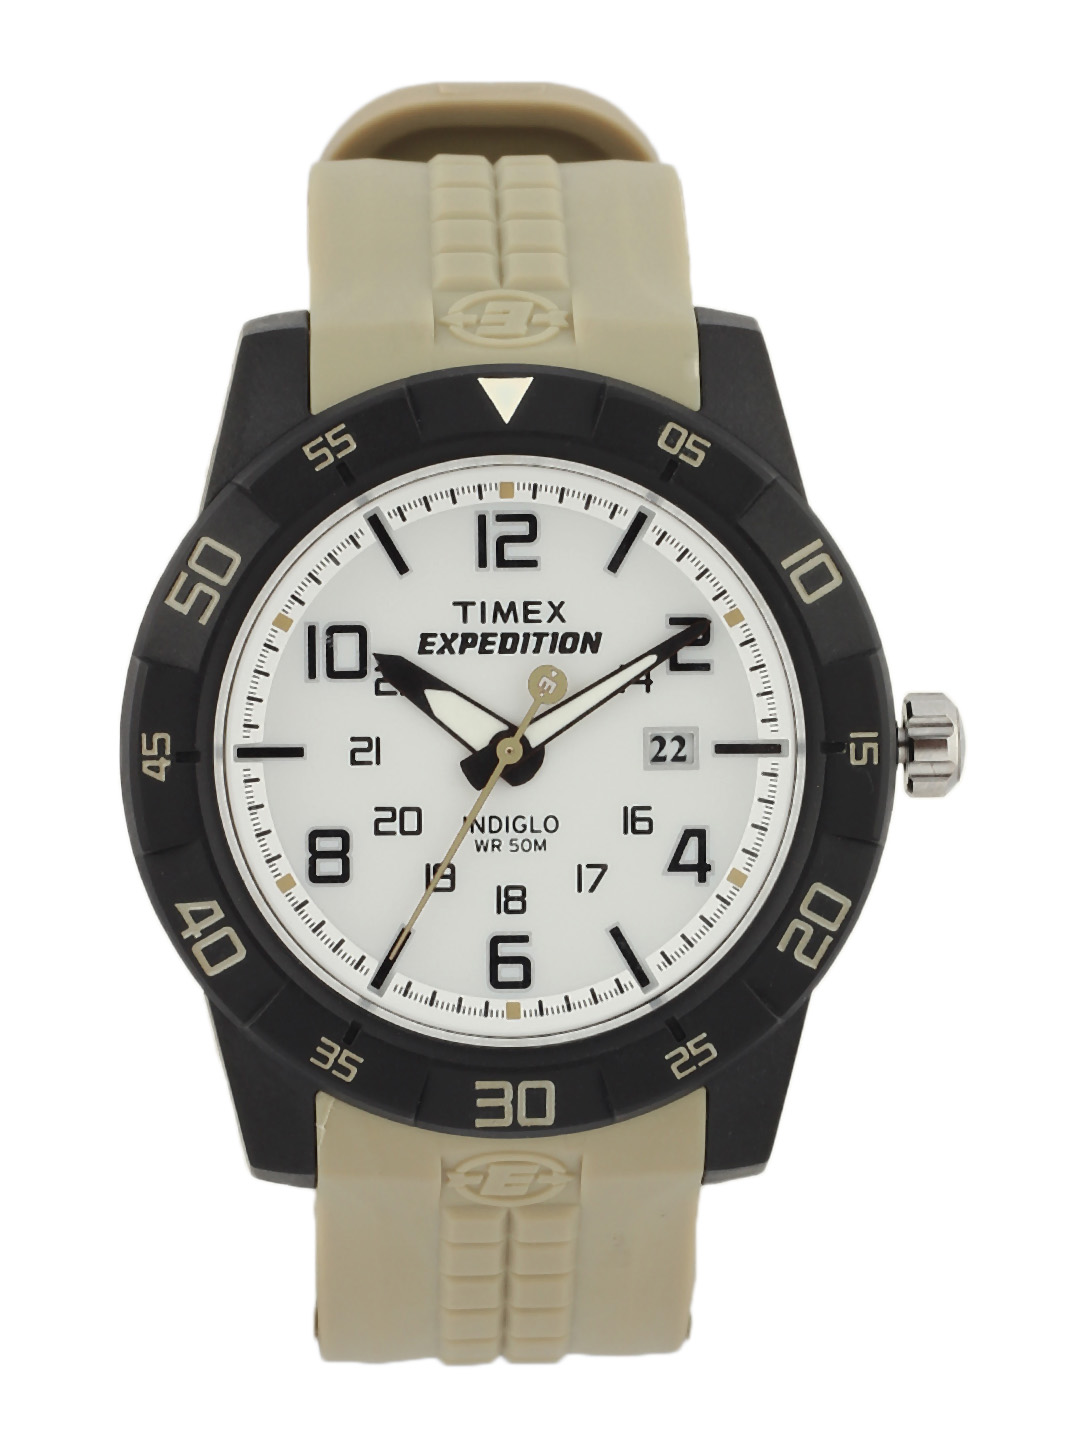 myntassets.com/images/style/properties/Timex-Men-White-Dial-Watch